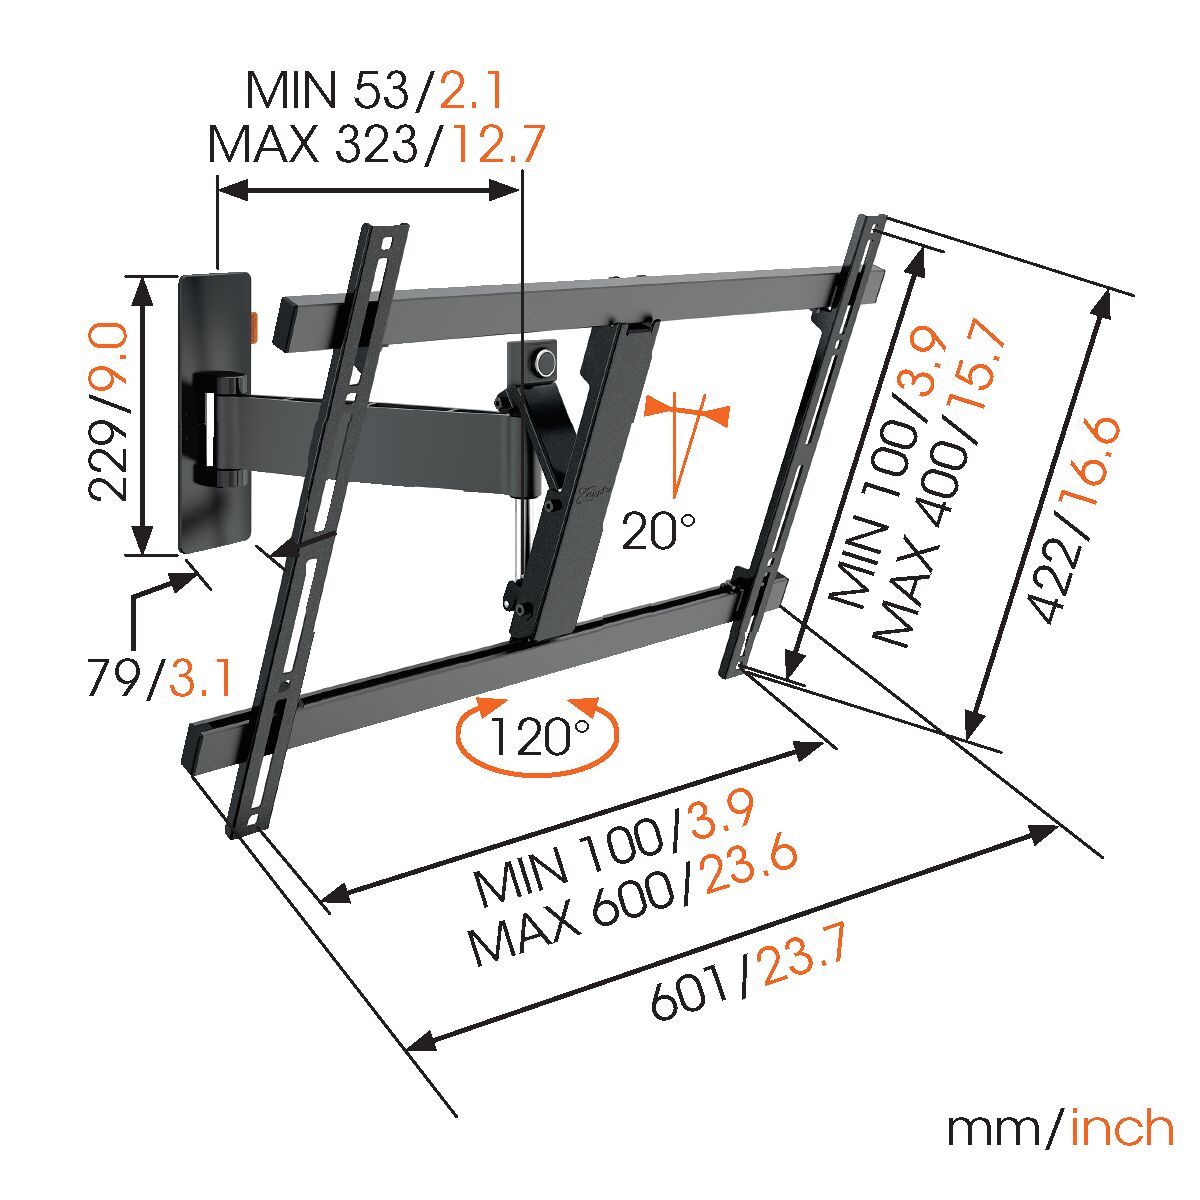 Vogel's W52080 Full-Motion TV Wall Mount (black) - Suitable for 40 up to 65 inch TVs - Motion (up to 120°) - Tilt up to 20° - Dimensions